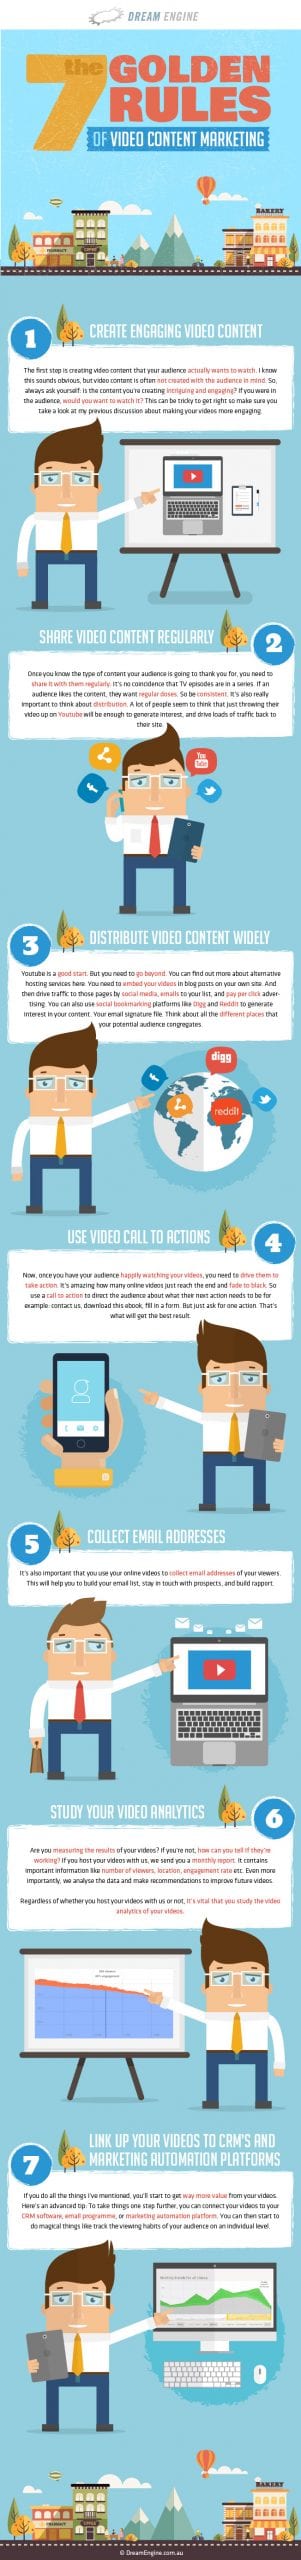 7-Rules-Video-Content-Marketing-Infographic